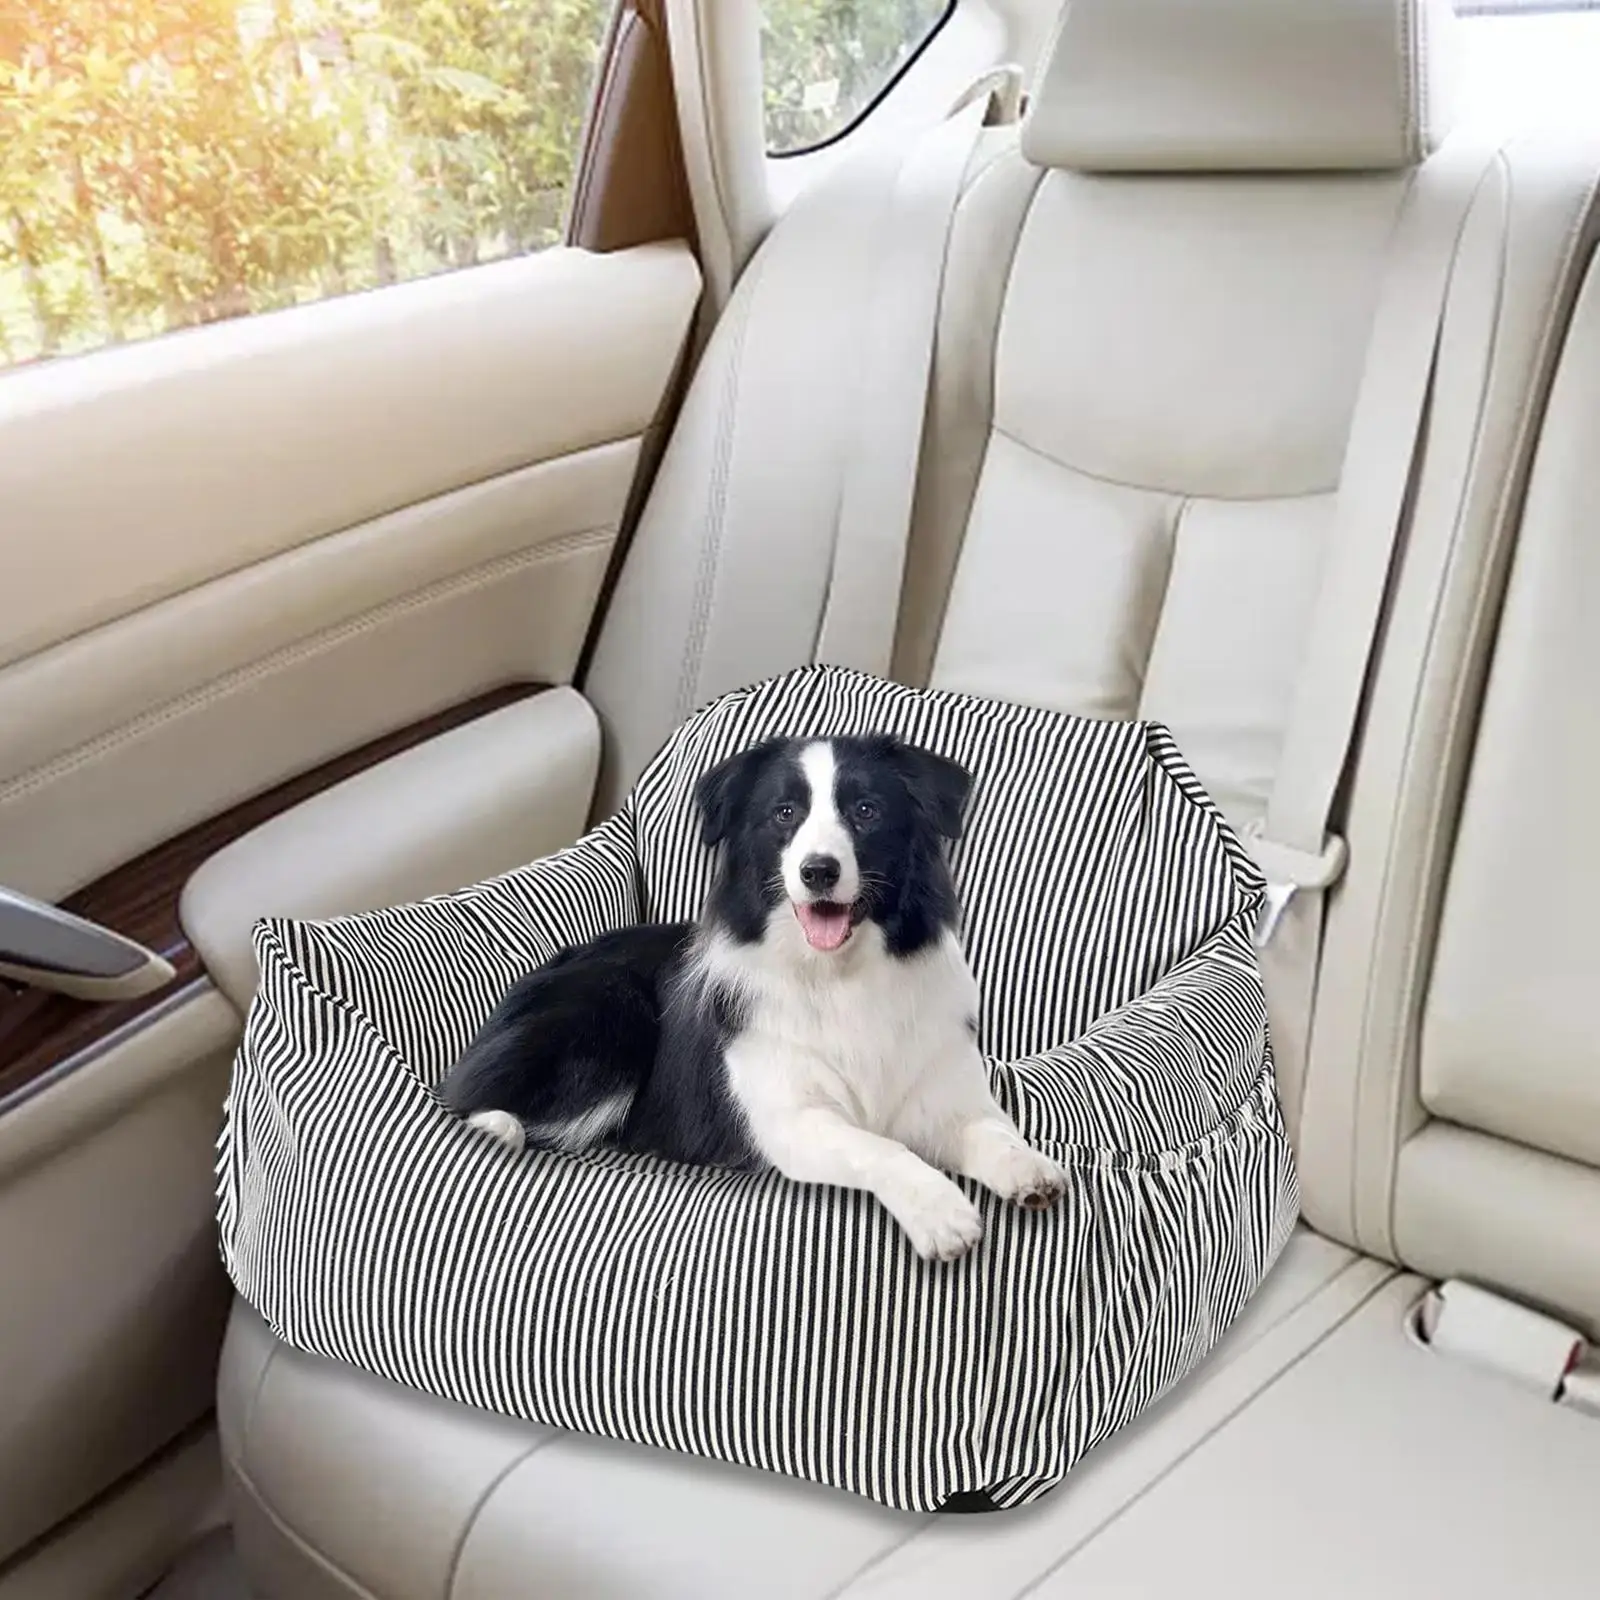 Puppy Car Booster Seat Traveling Dog Cat Carrier 50x50x30cm Comfortable Durable Detachable Cover Soft Material for Traveling